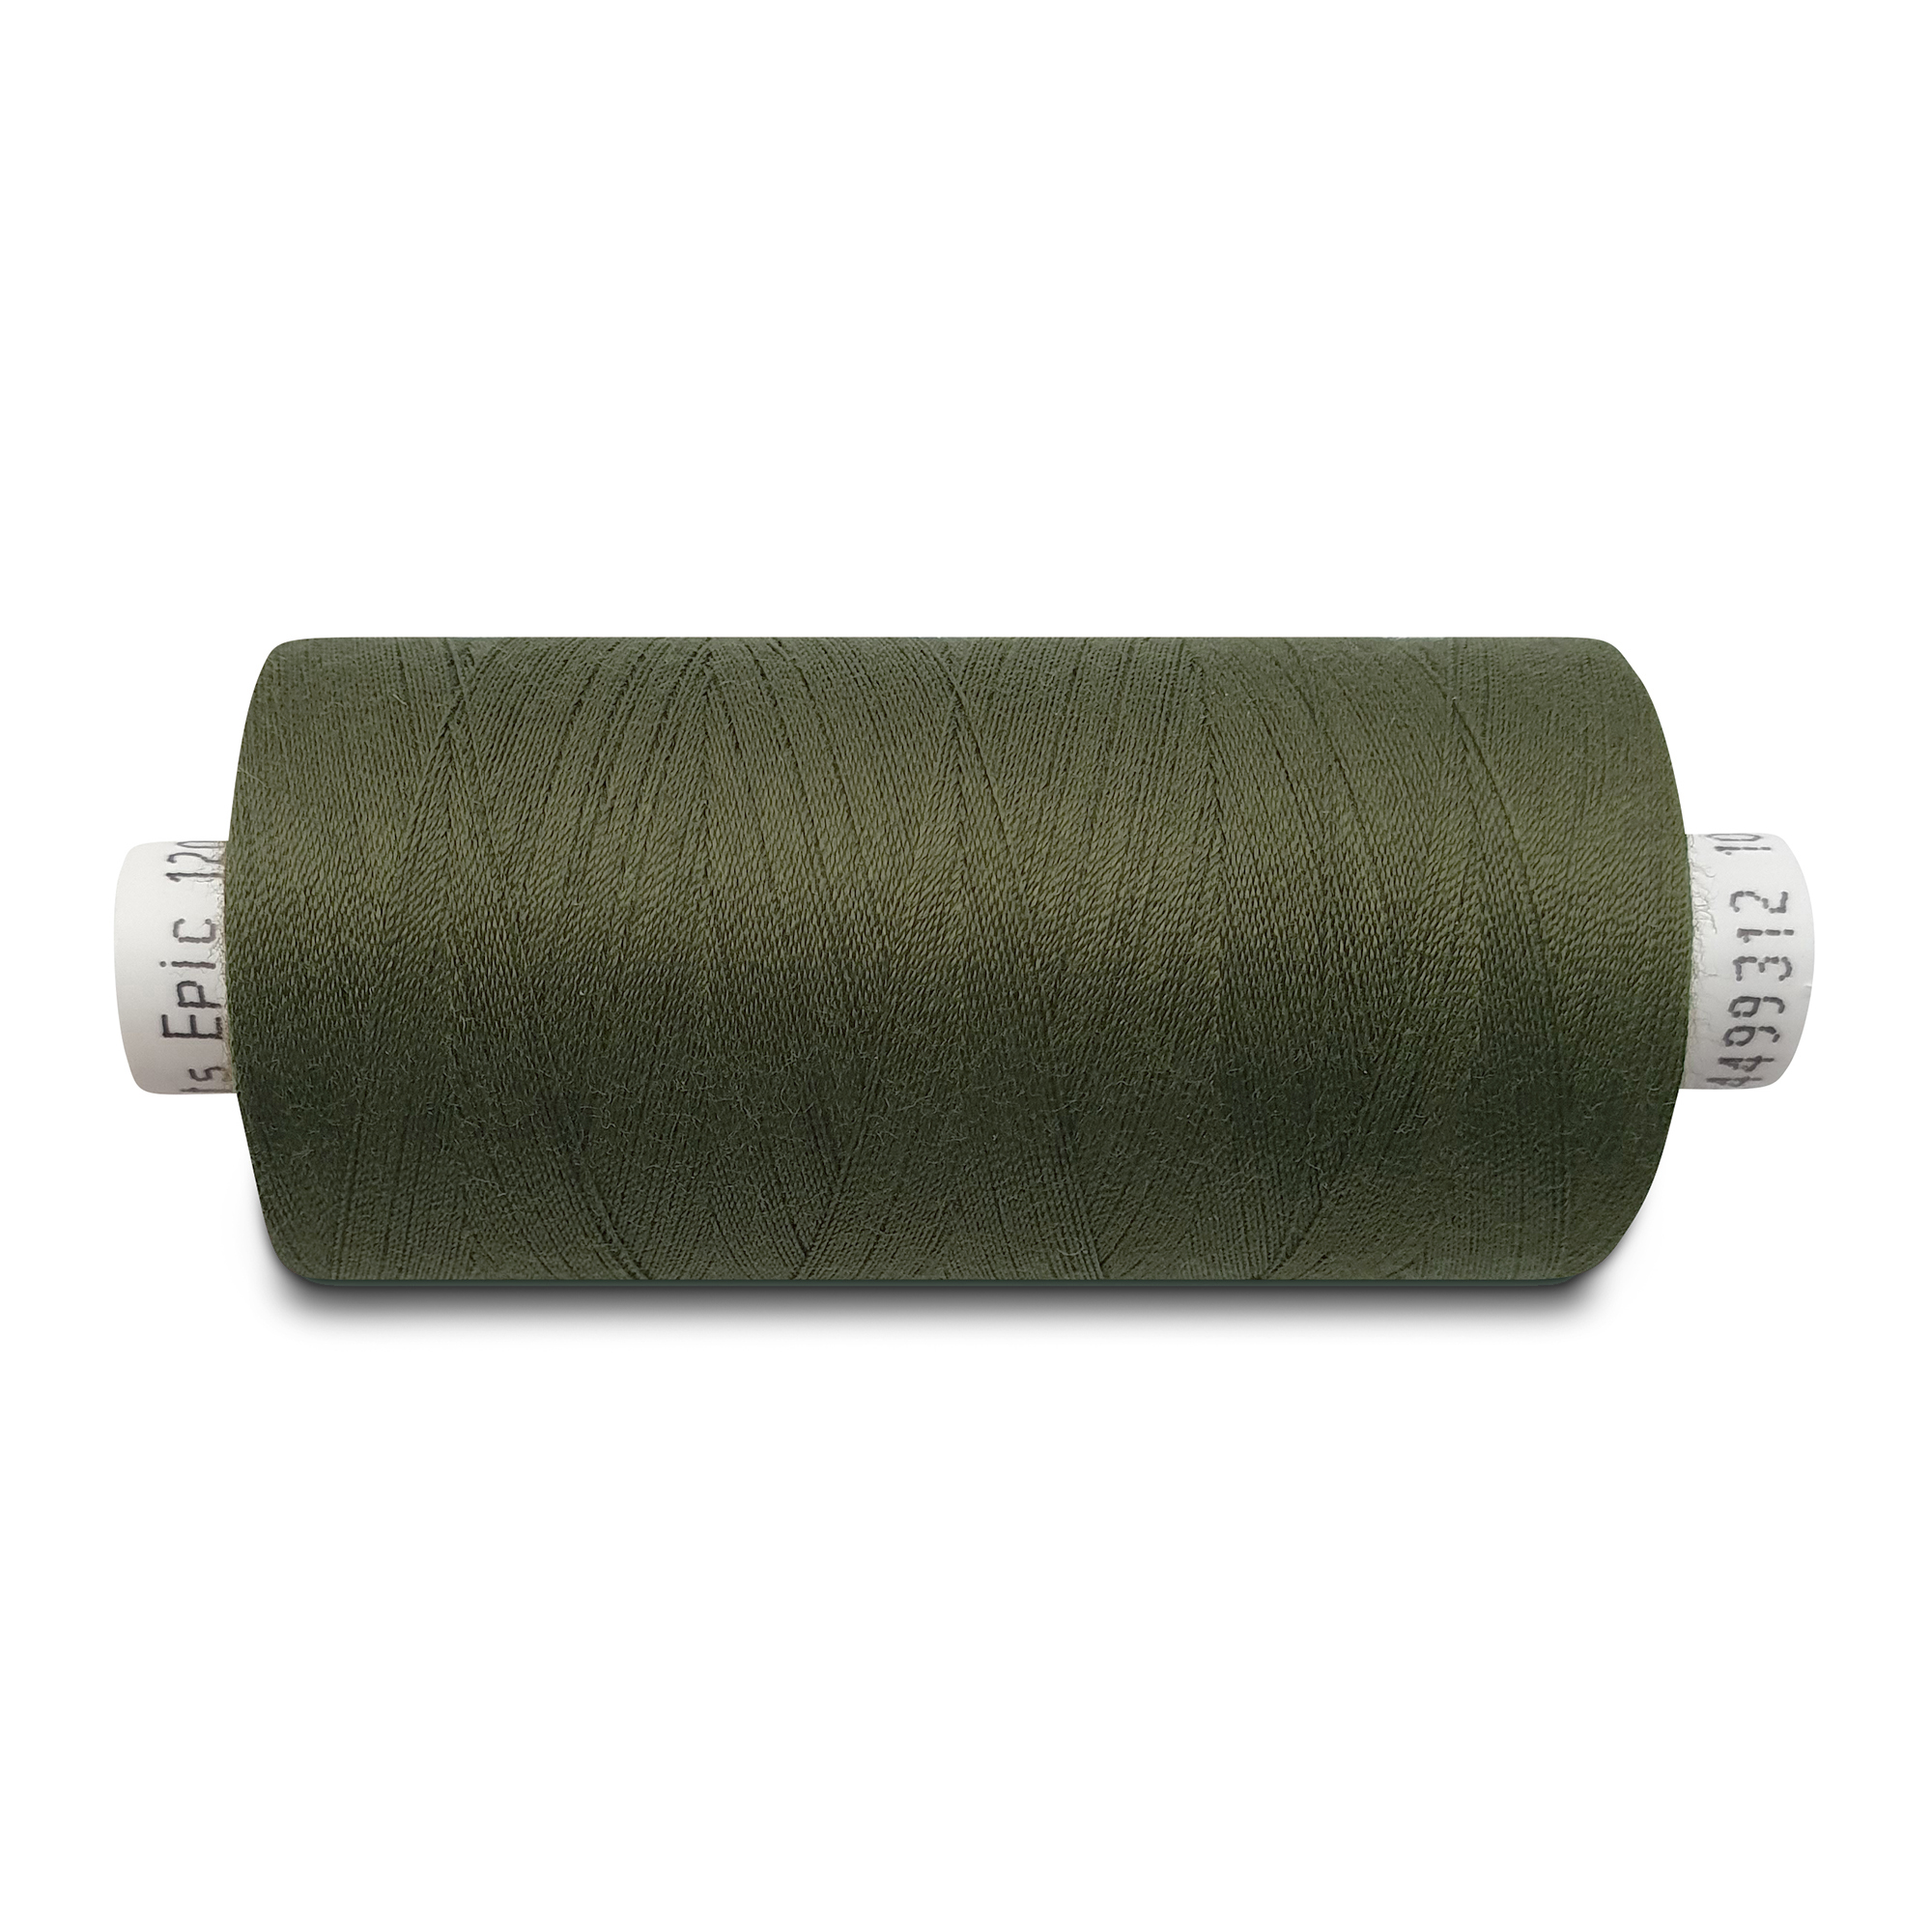 Leather/Sewing thread army olive